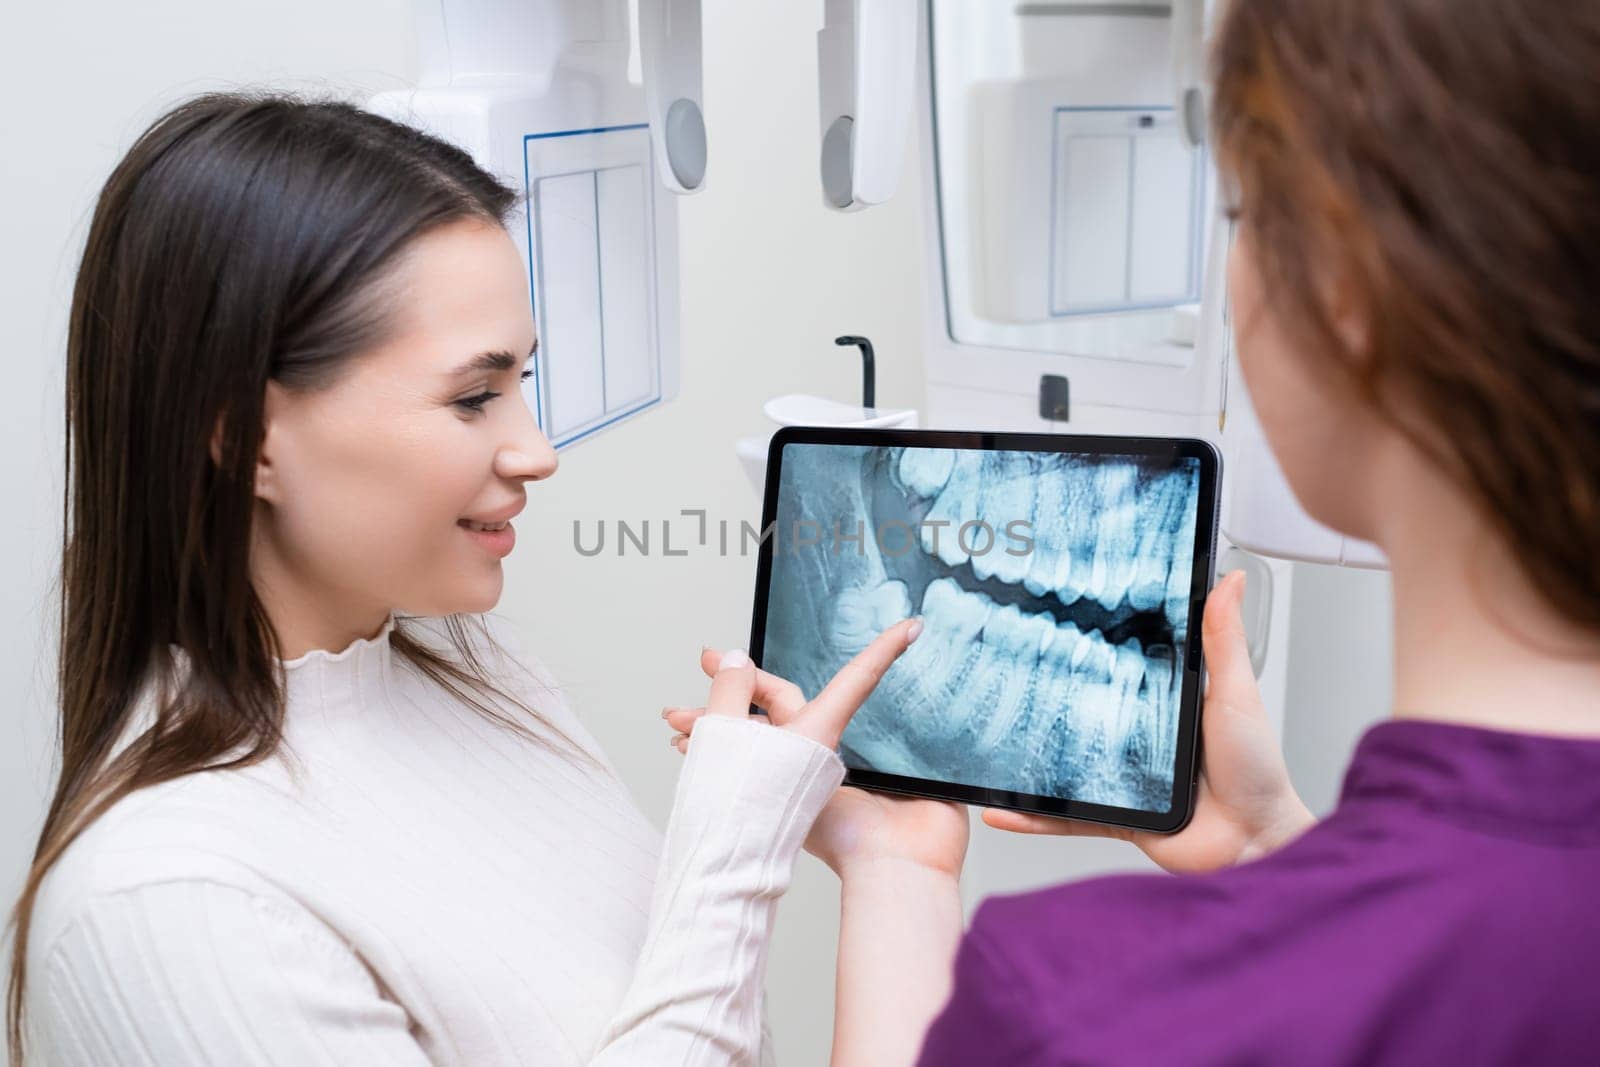 Dentist showing to patient jaw teeth x ray image at dental office by vladimka